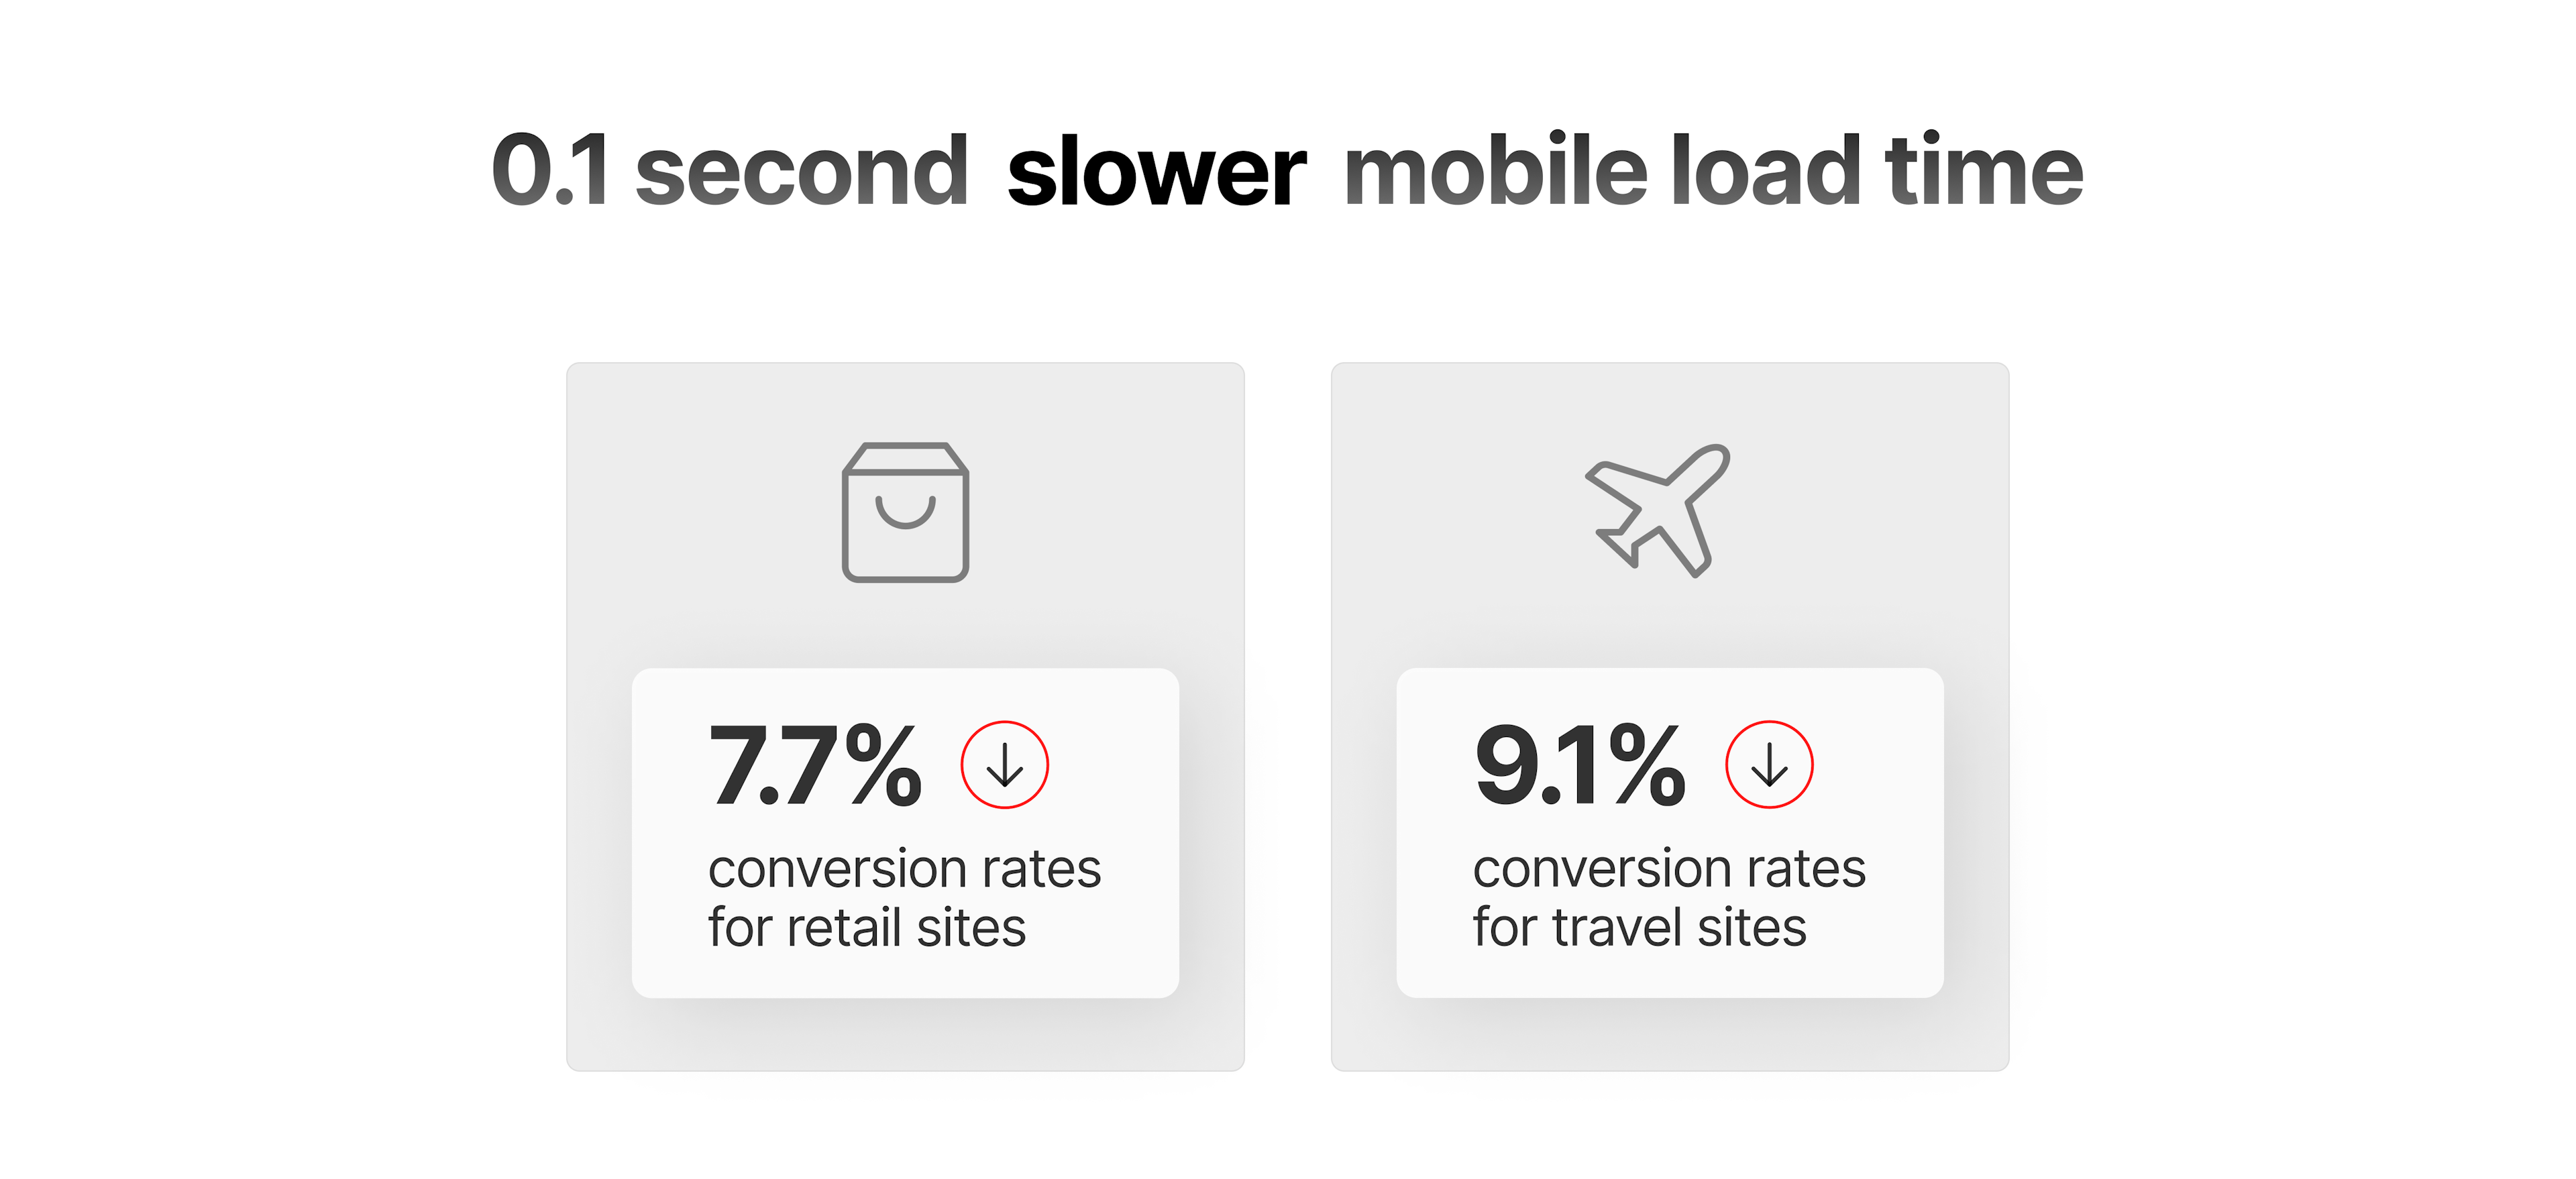 Slow load times have direct impact on user behavior.¹